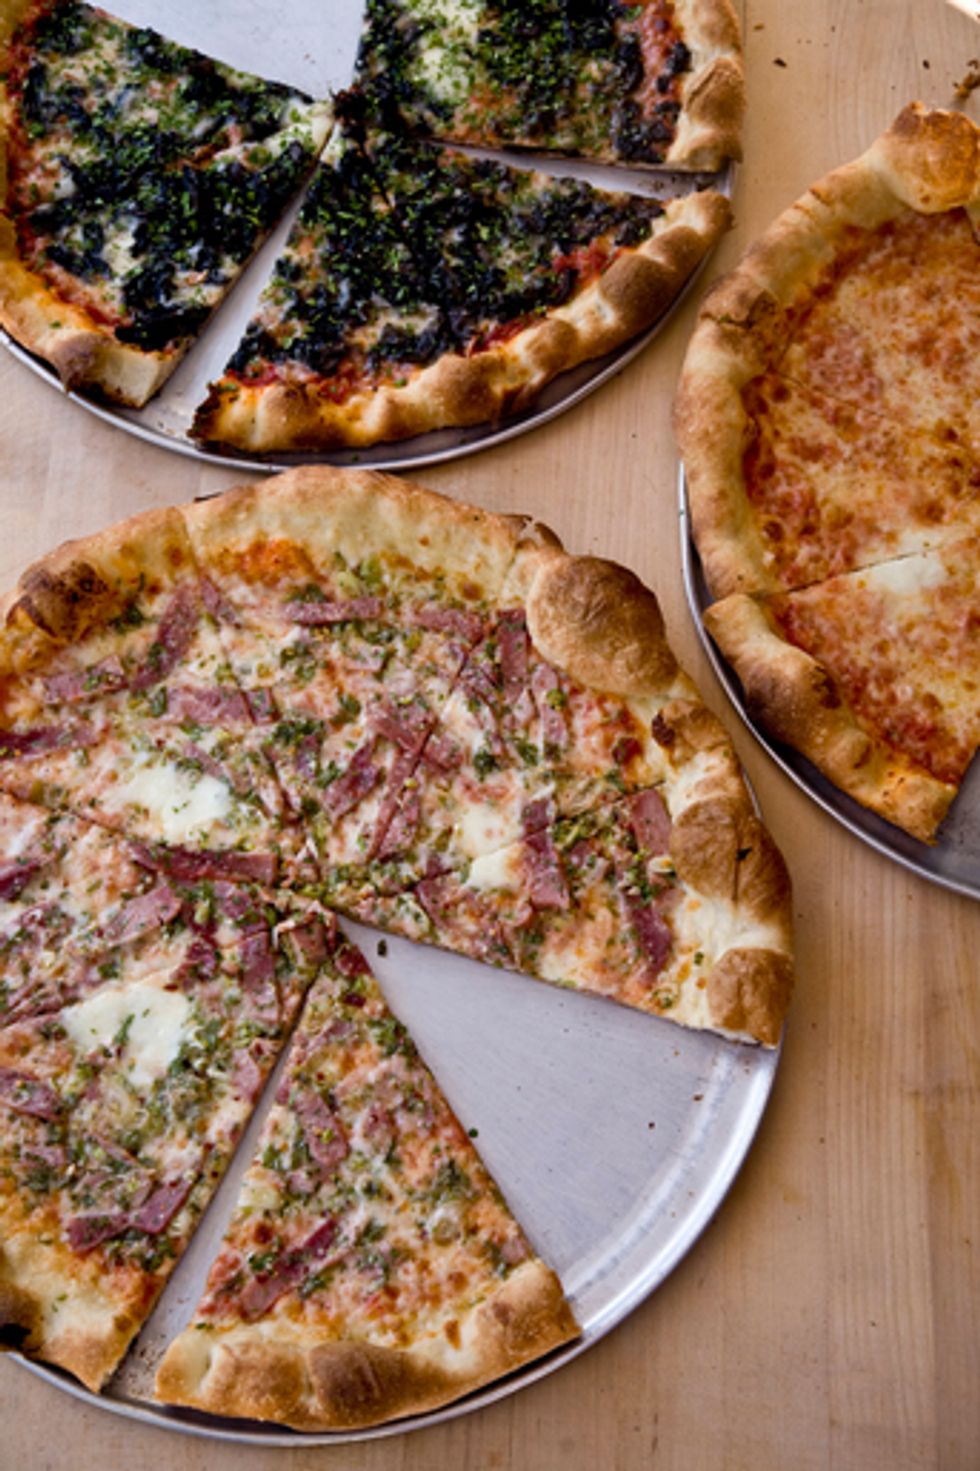 Polk Street Welcomes Gioia Pizzeria, Marbella & Square Meals/Batter Bakery